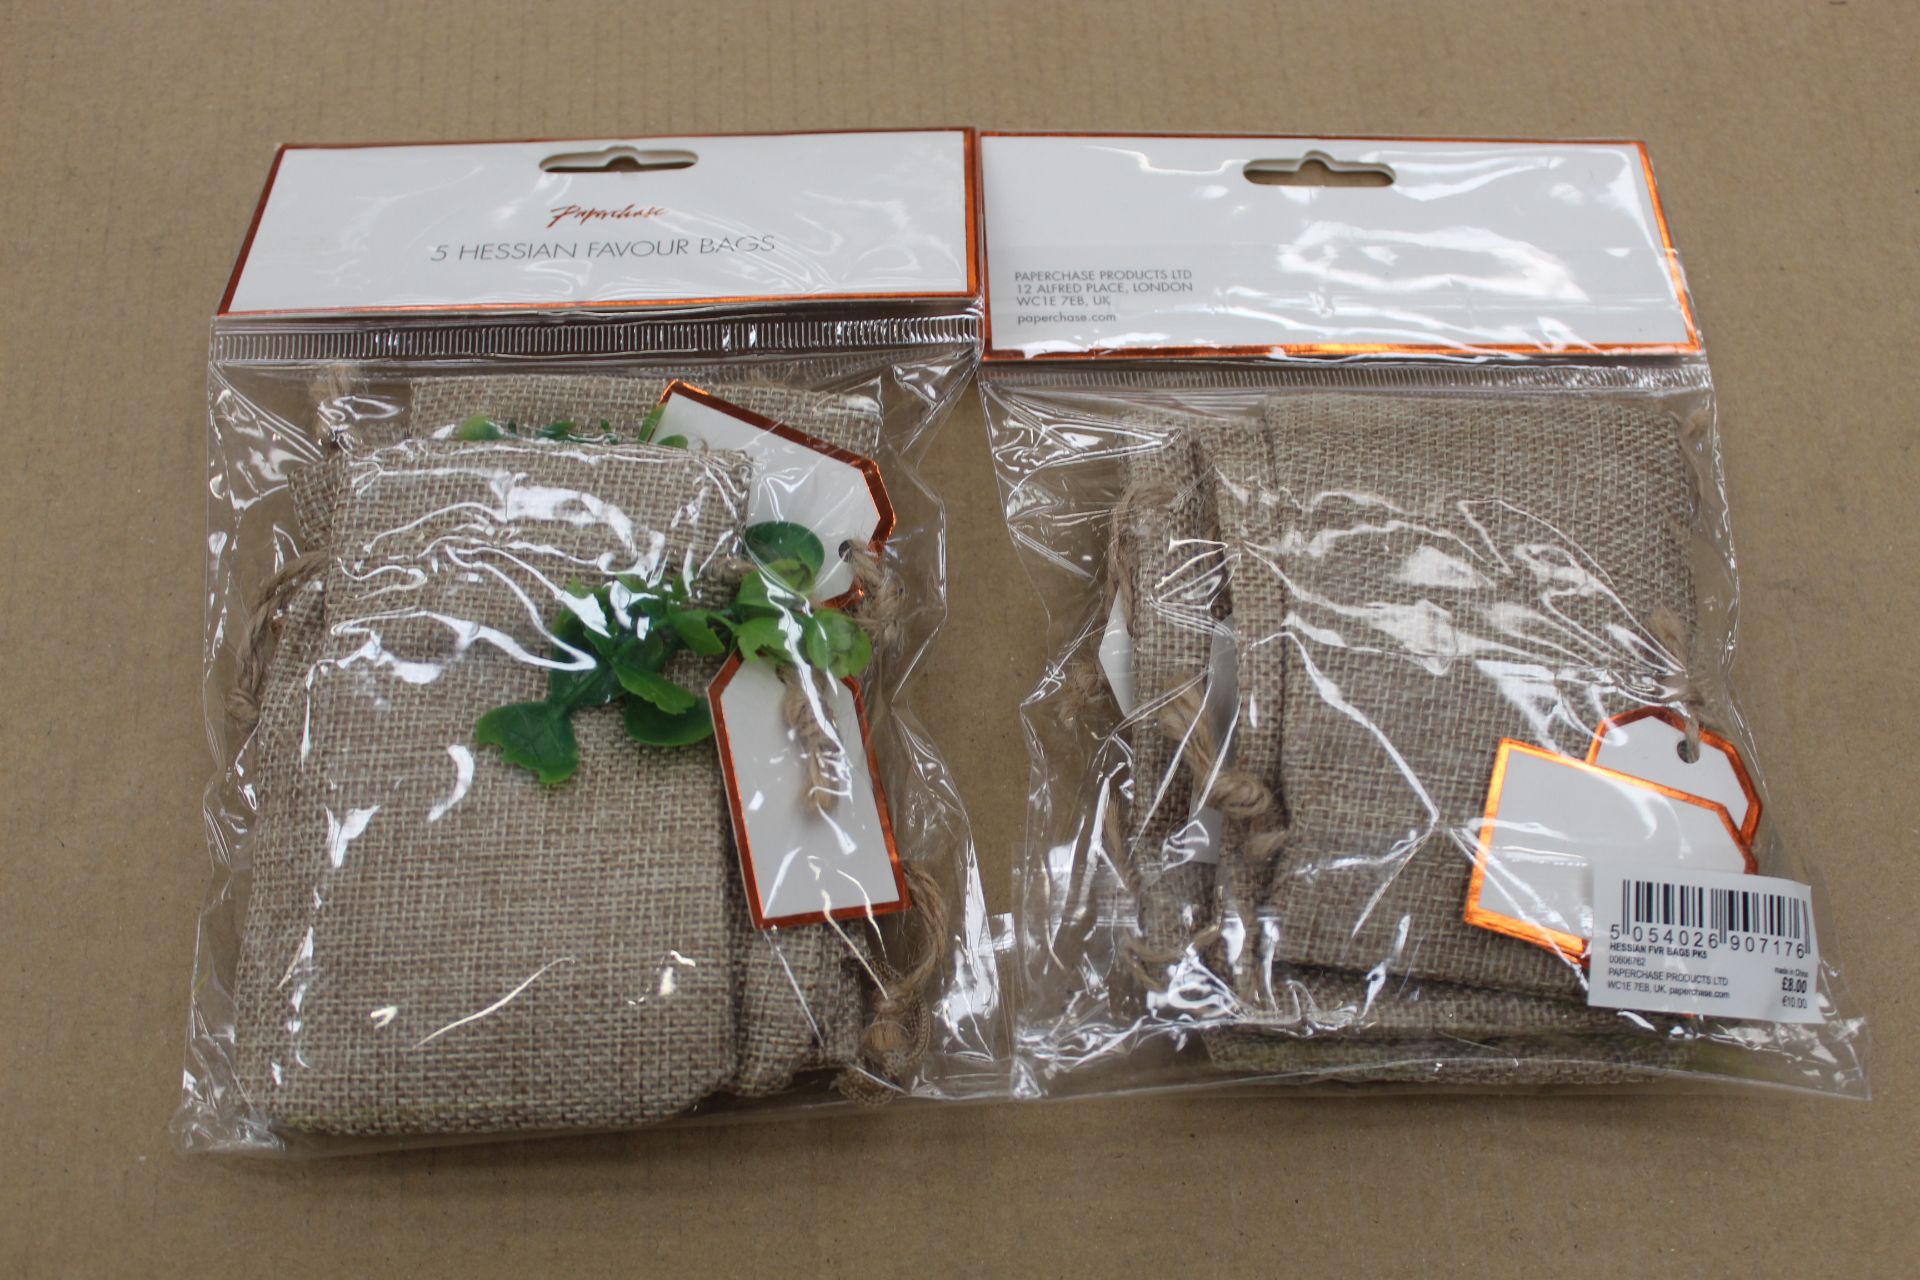 1188x Hessian Fvr Bags PK5 Total Retail: £9504 (Collections) (1PJ111C) - Image 2 of 2